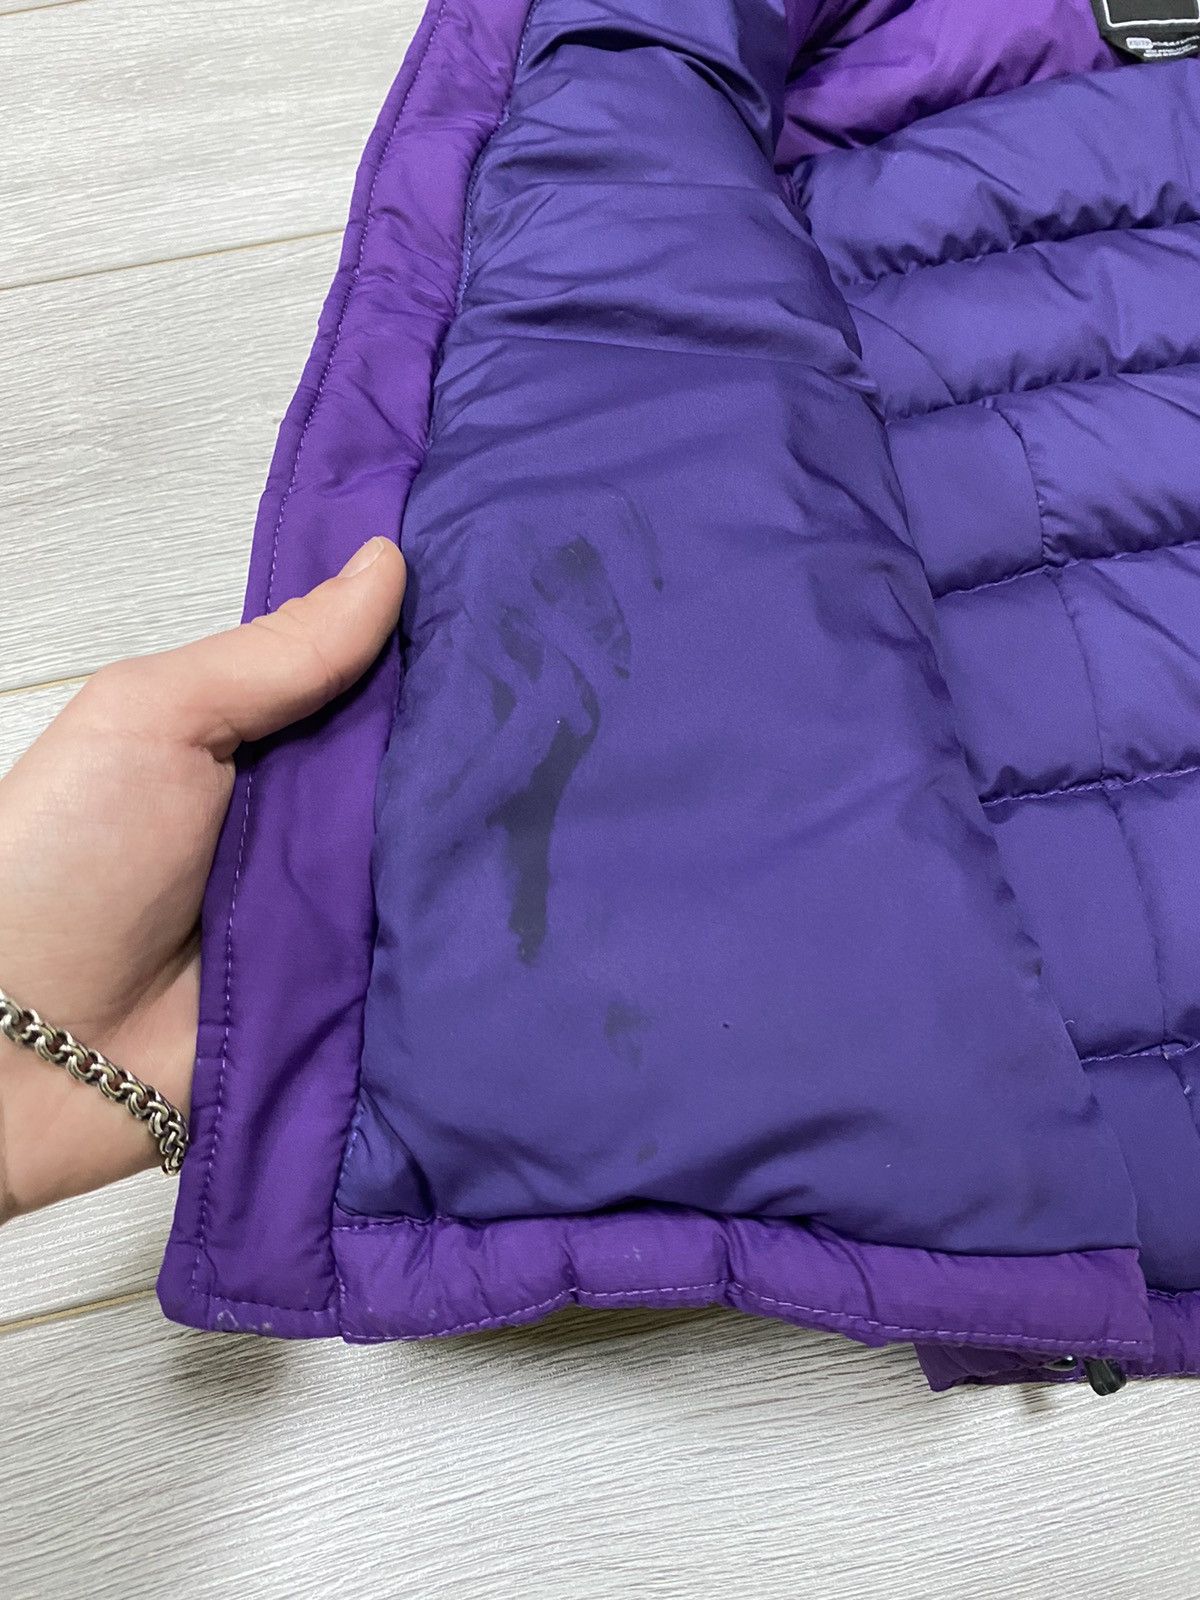 The North Face The North Face 700 purple women down vest Size XS / US 0-2 / IT 36-38 - 8 Thumbnail